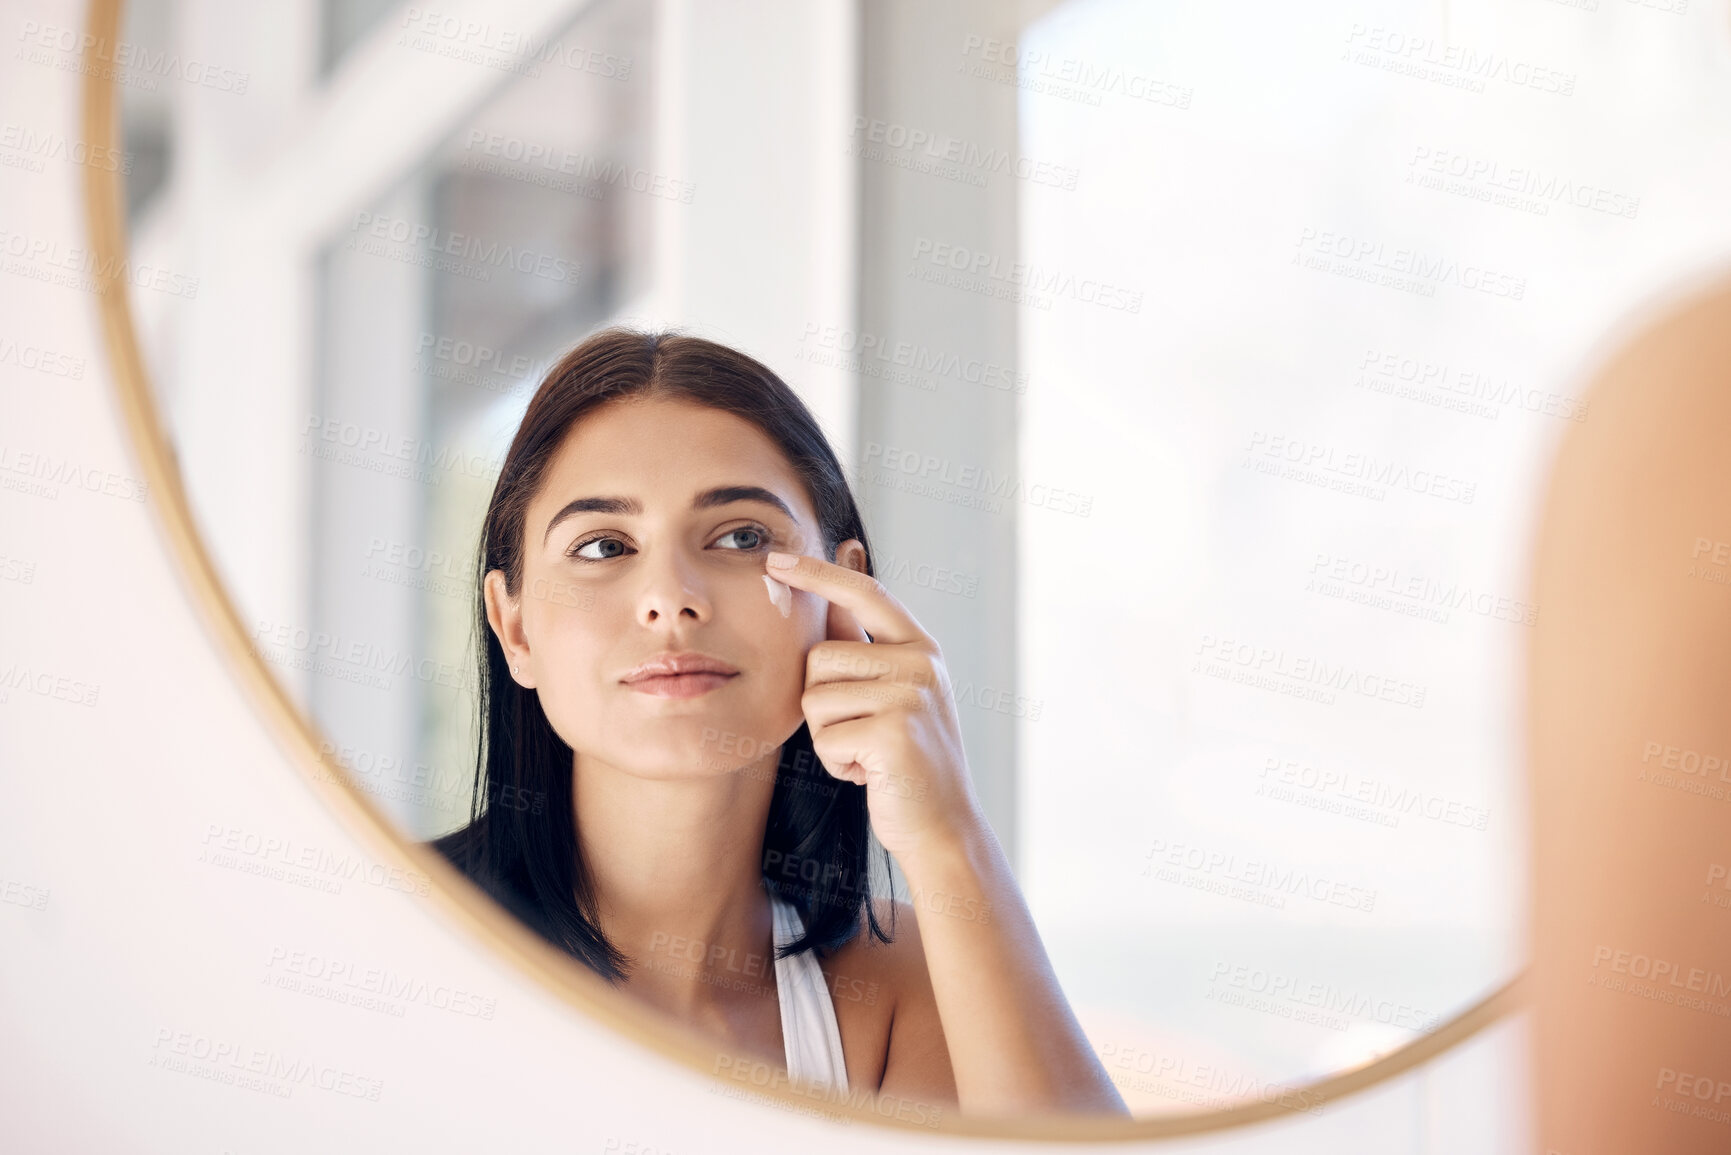 Buy stock photo Mirror reflection of woman with skincare cream, spa lotion or dermatology ointment for melasma or acne treatment. Bathroom facial routine, healthcare and face of girl apply cosmetics beauty product